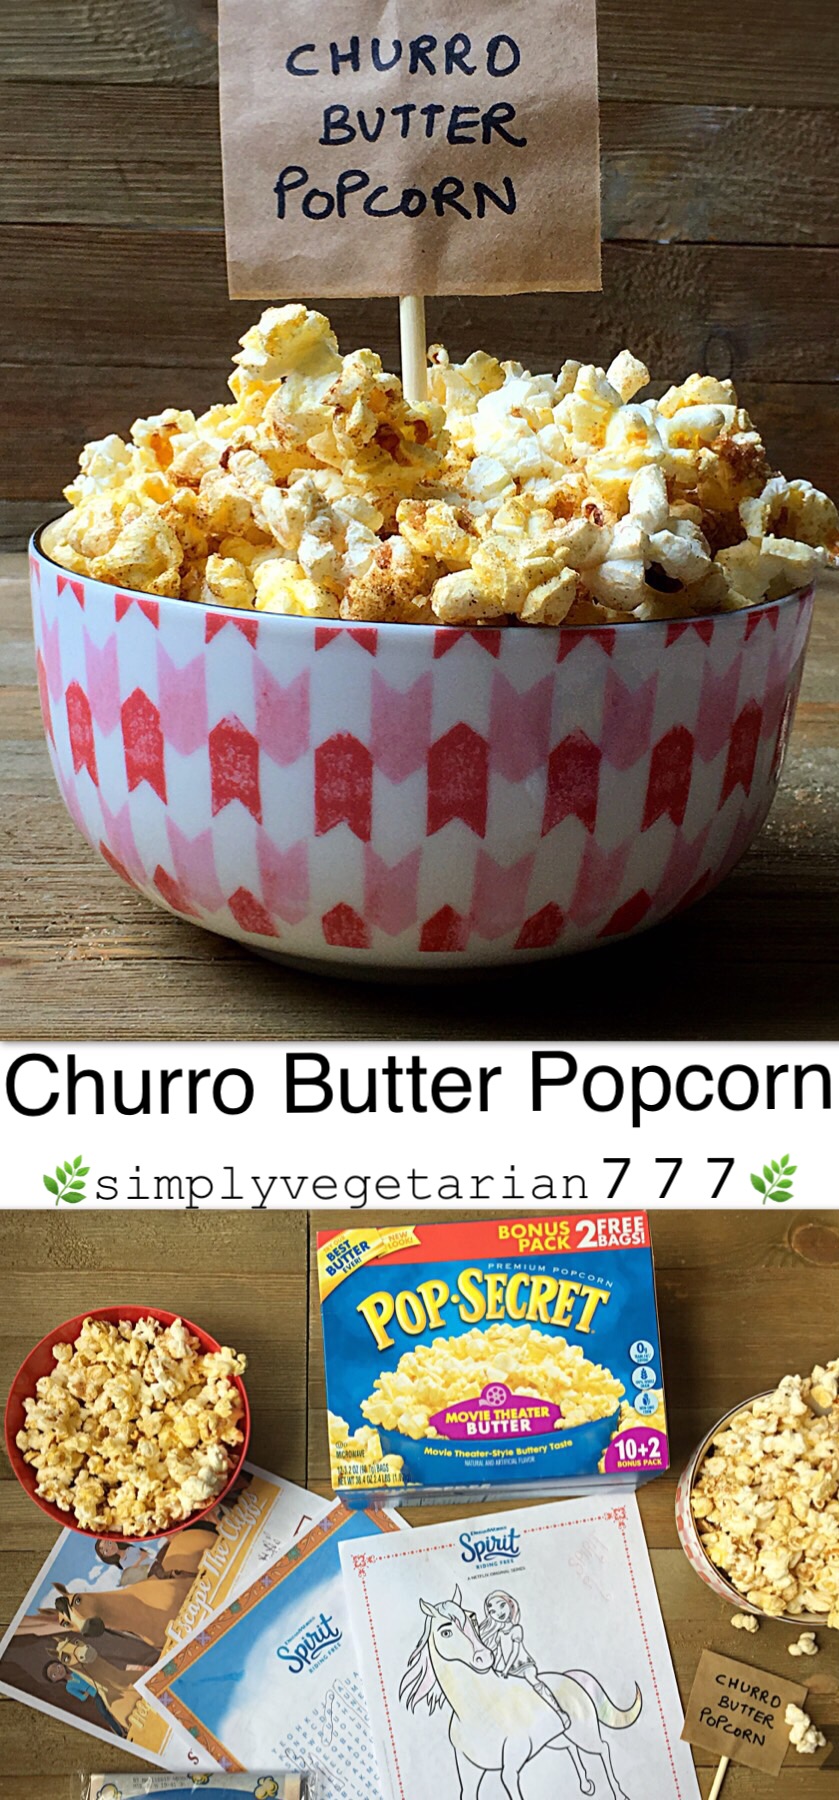 Churro Butter Popcorn is the best thing to happen when catching up on the 6th Season of SPIRIT RIDING FREE. It is a perfect scenario before kids go back to school. Just pop some corn, add some Churro Butter and indulge. That equals BONDING + YUM together. These are delicious and super easy to make with POP SECRET MOVIE THEATER BUTTER POPCORN bought at our favorite store Walmart. #Pop4Spirit #Pmedia #ad